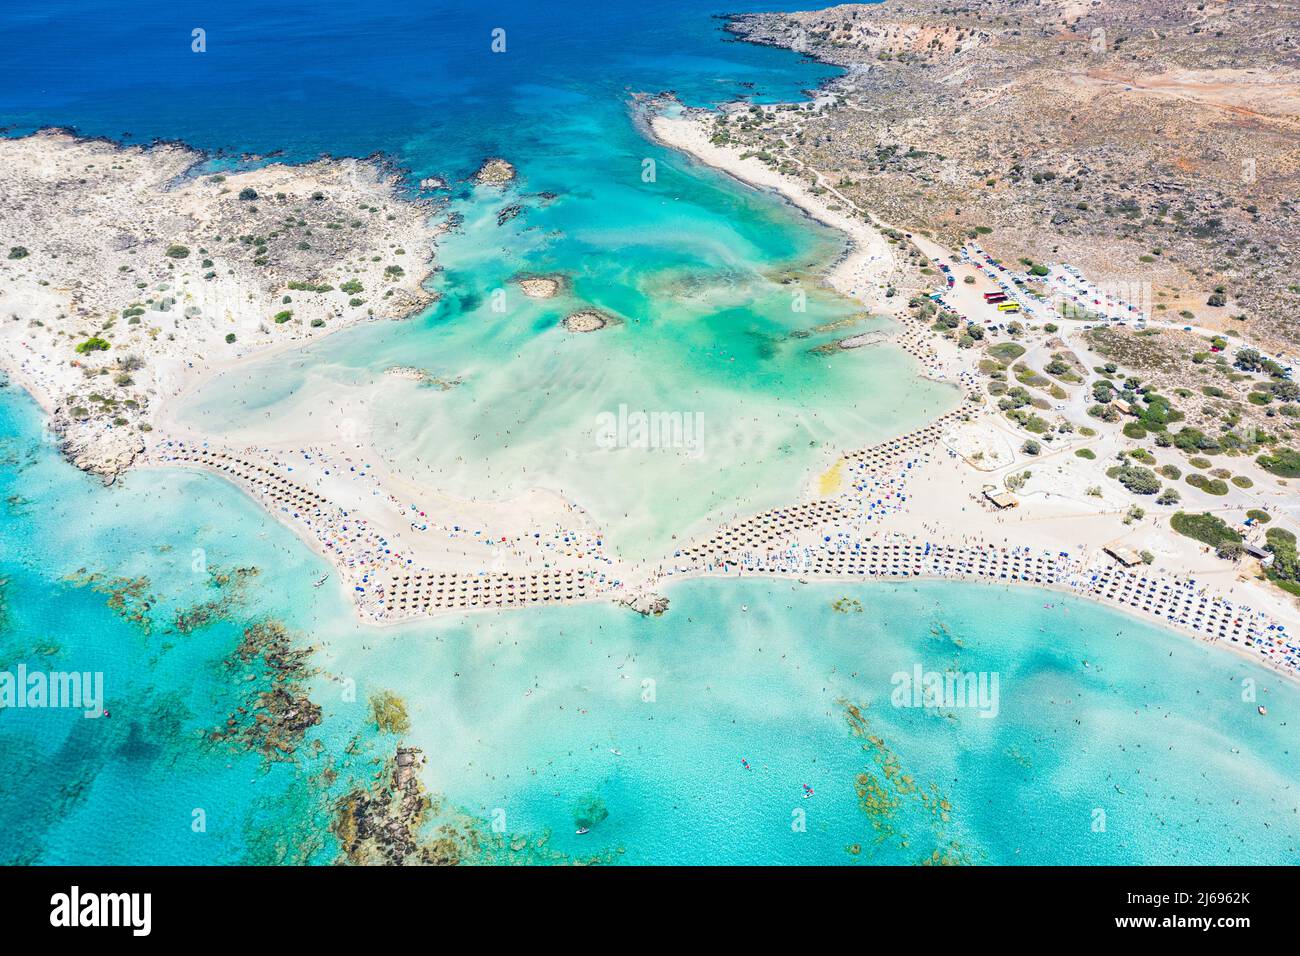 Aerial view of the equipped Elafonissi beach set in the unspoiled turquoise lagoon, Crete island, Greek Islands, Greece Stock Photo